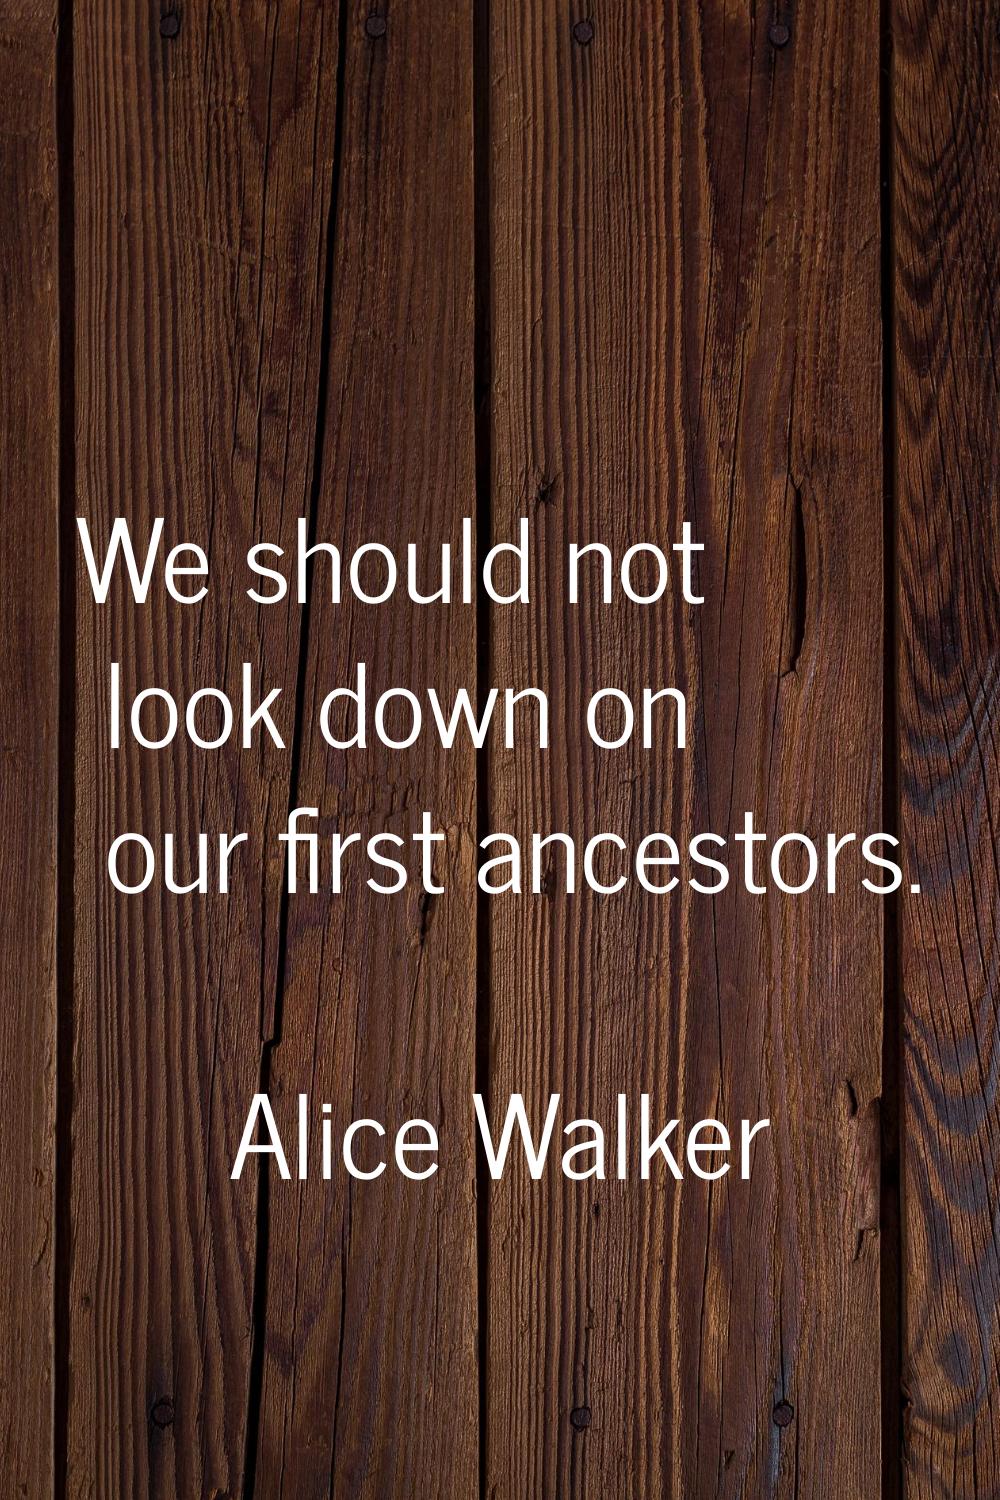 We should not look down on our first ancestors.